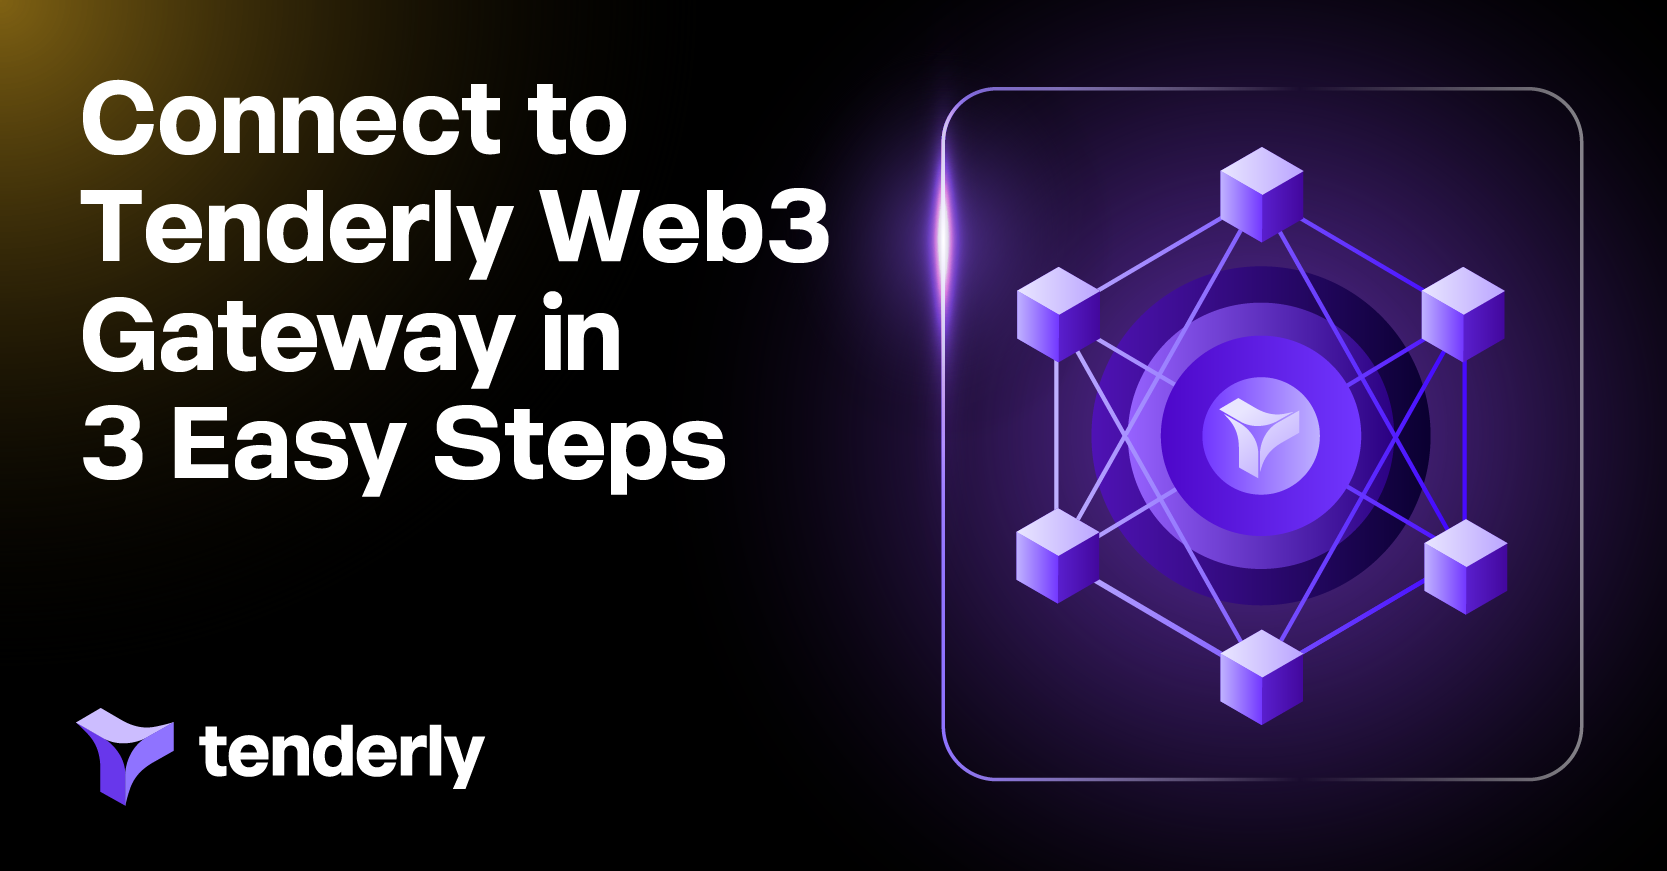 Getting Started with Tenderly Web3 Gateway